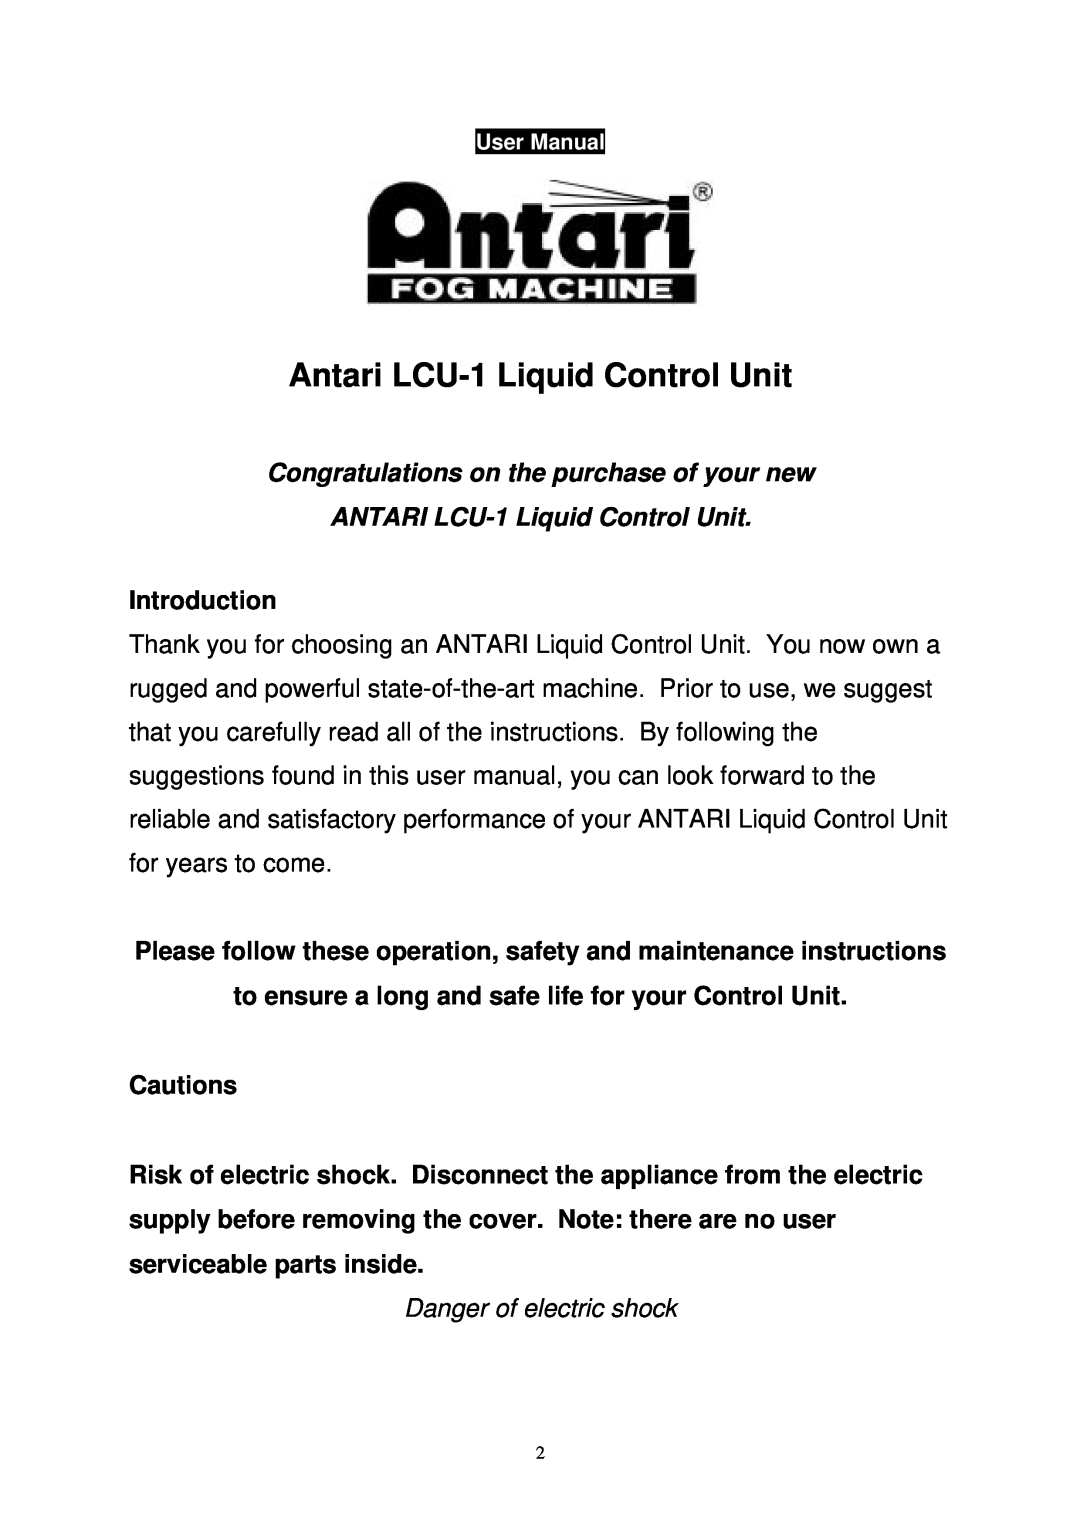 Antari Lighting and Effects user manual Congratulations on the purchase of your new, ANTARI LCU-1 Liquid Control Unit 